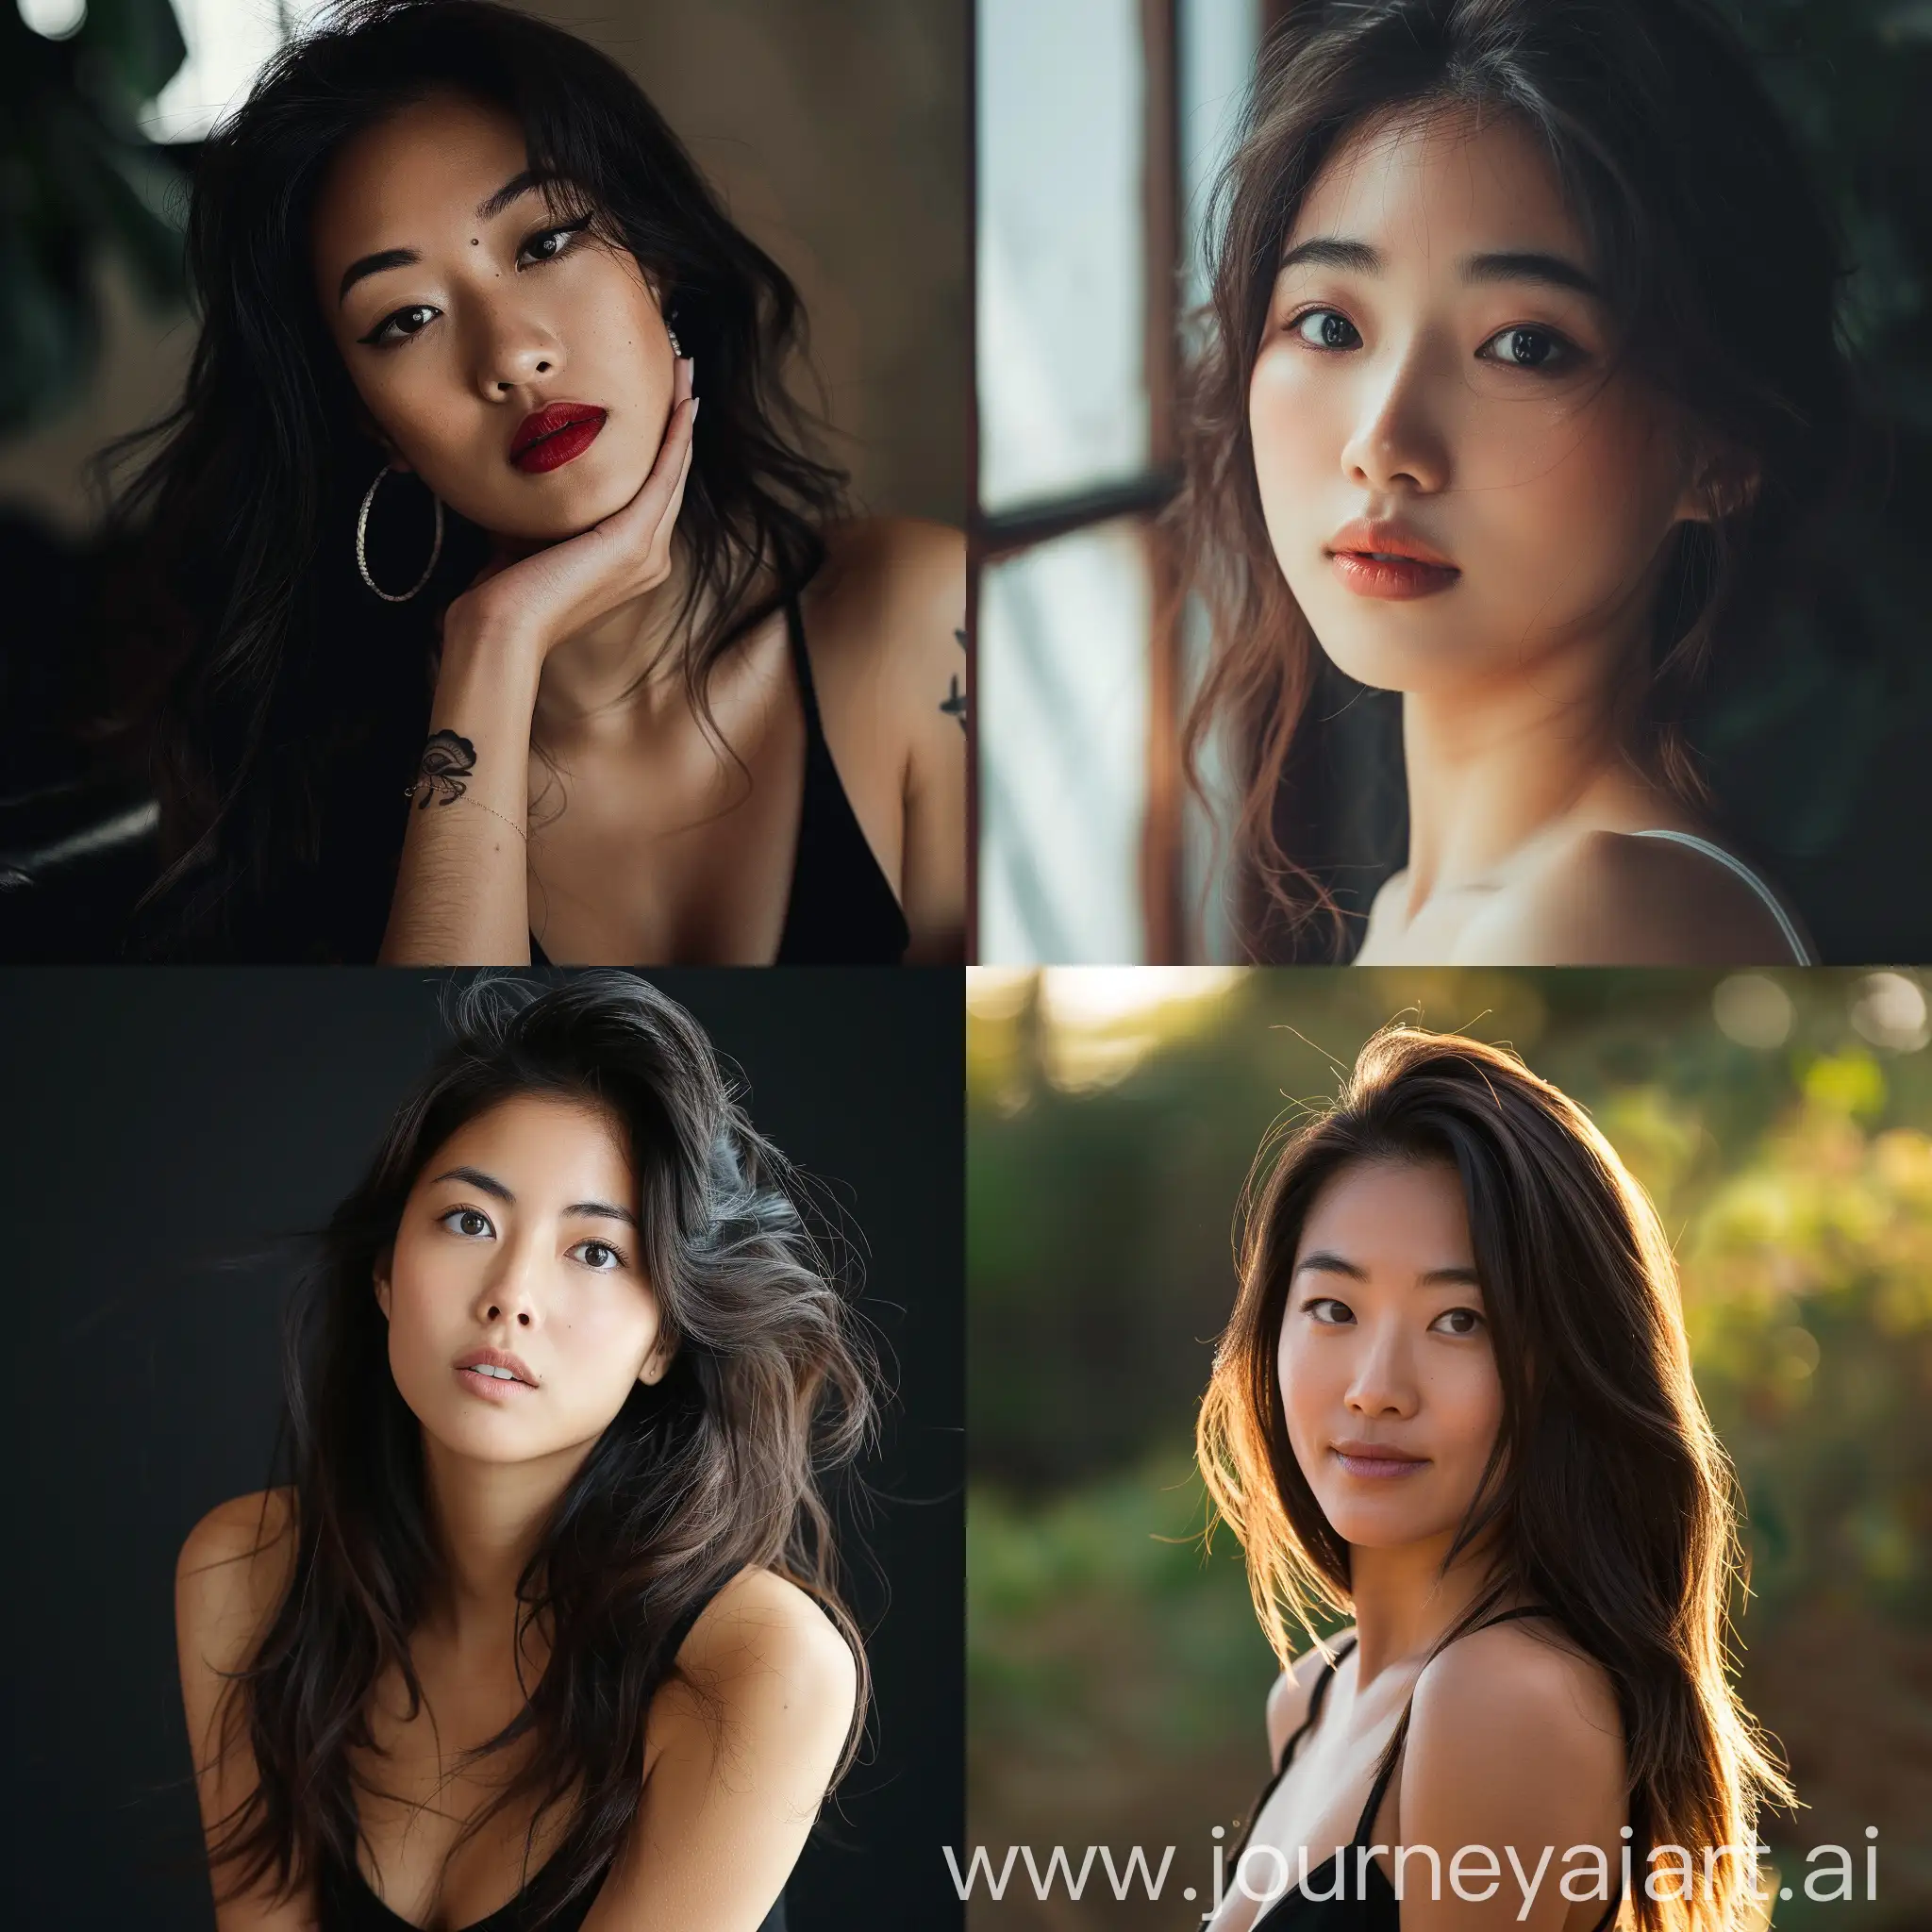 Stunning-Asian-Woman-Portrait-in-Square-Format